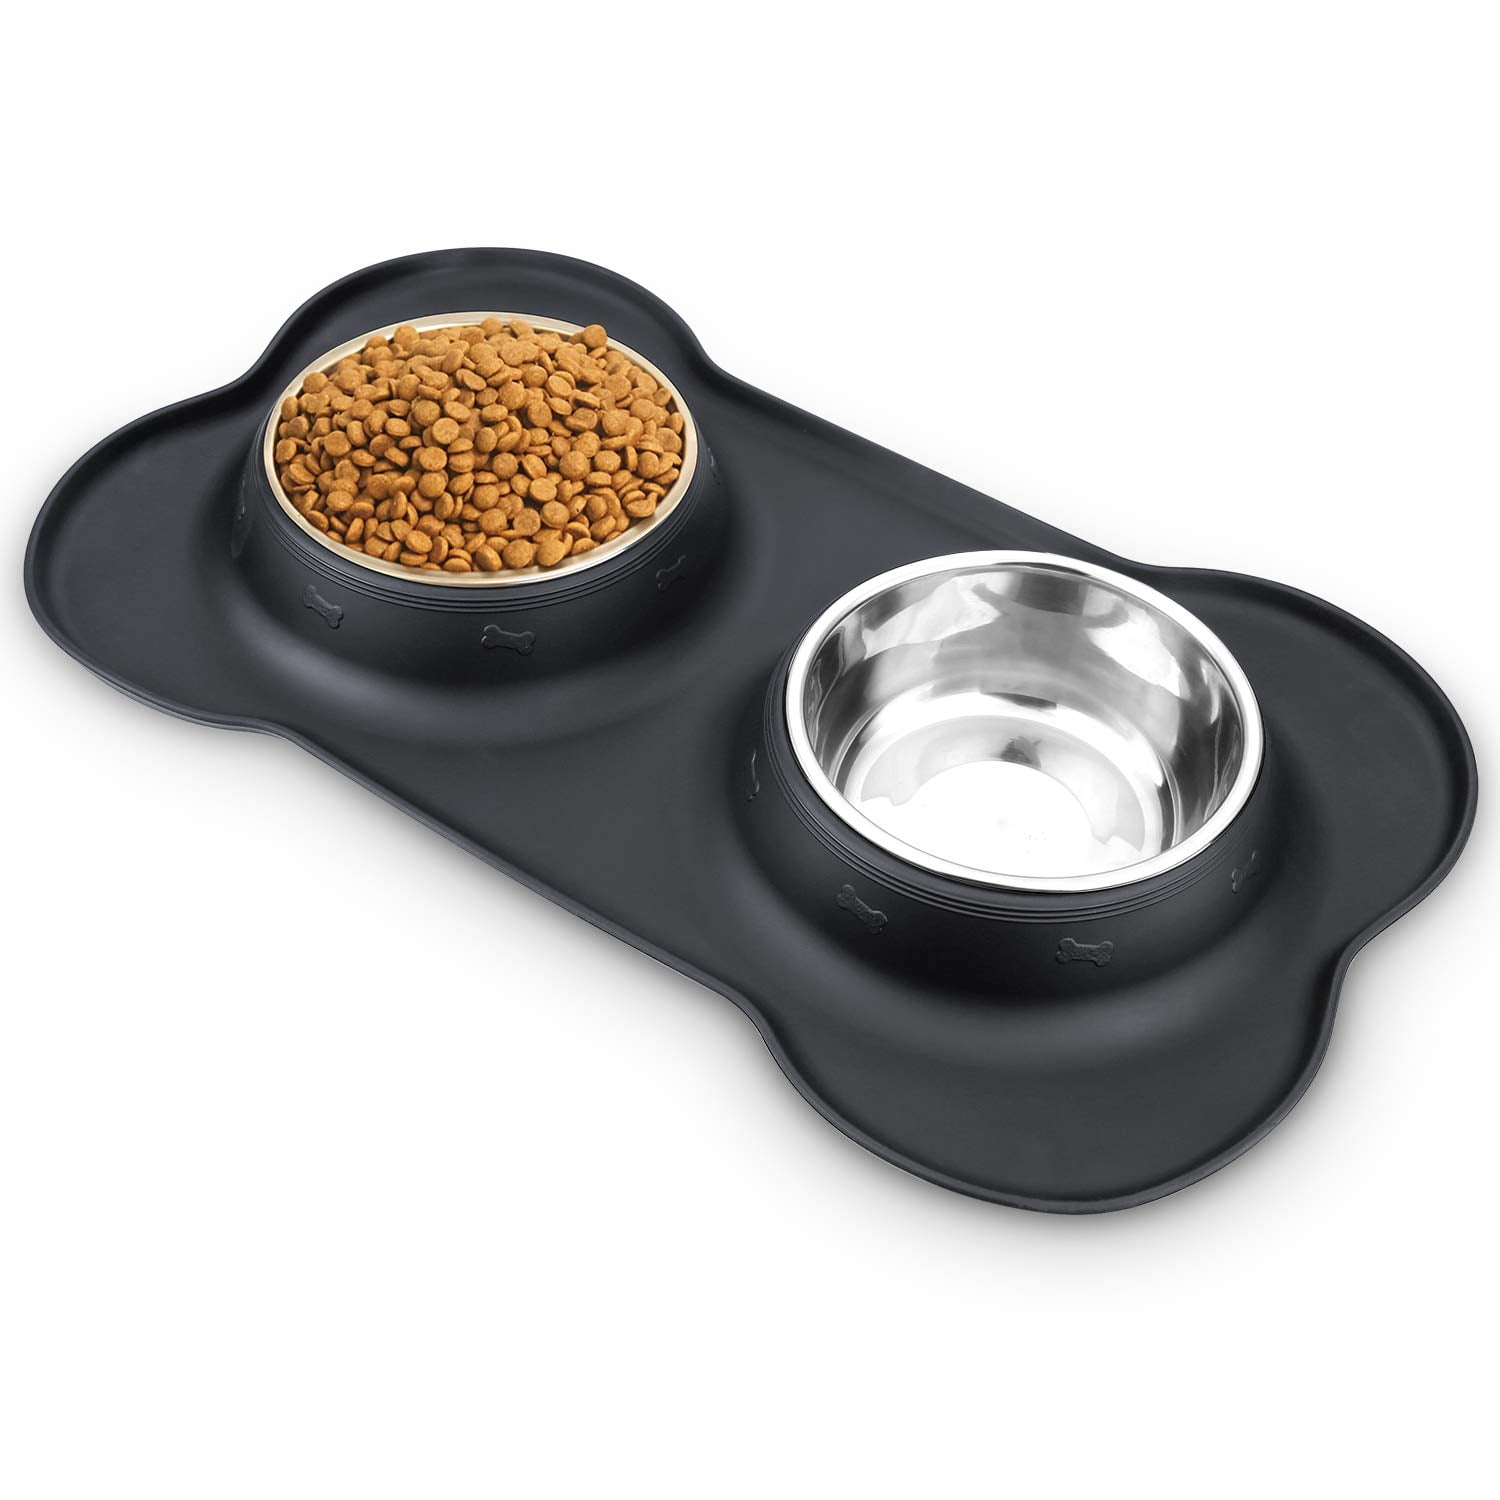 Nepfaivy Dog Bowls, cat Food and Water Bowls Stainless Steel, Double Pet  Feeder Bowls with No Spill Non-Skid Silicone Mat, Dog Dish for S